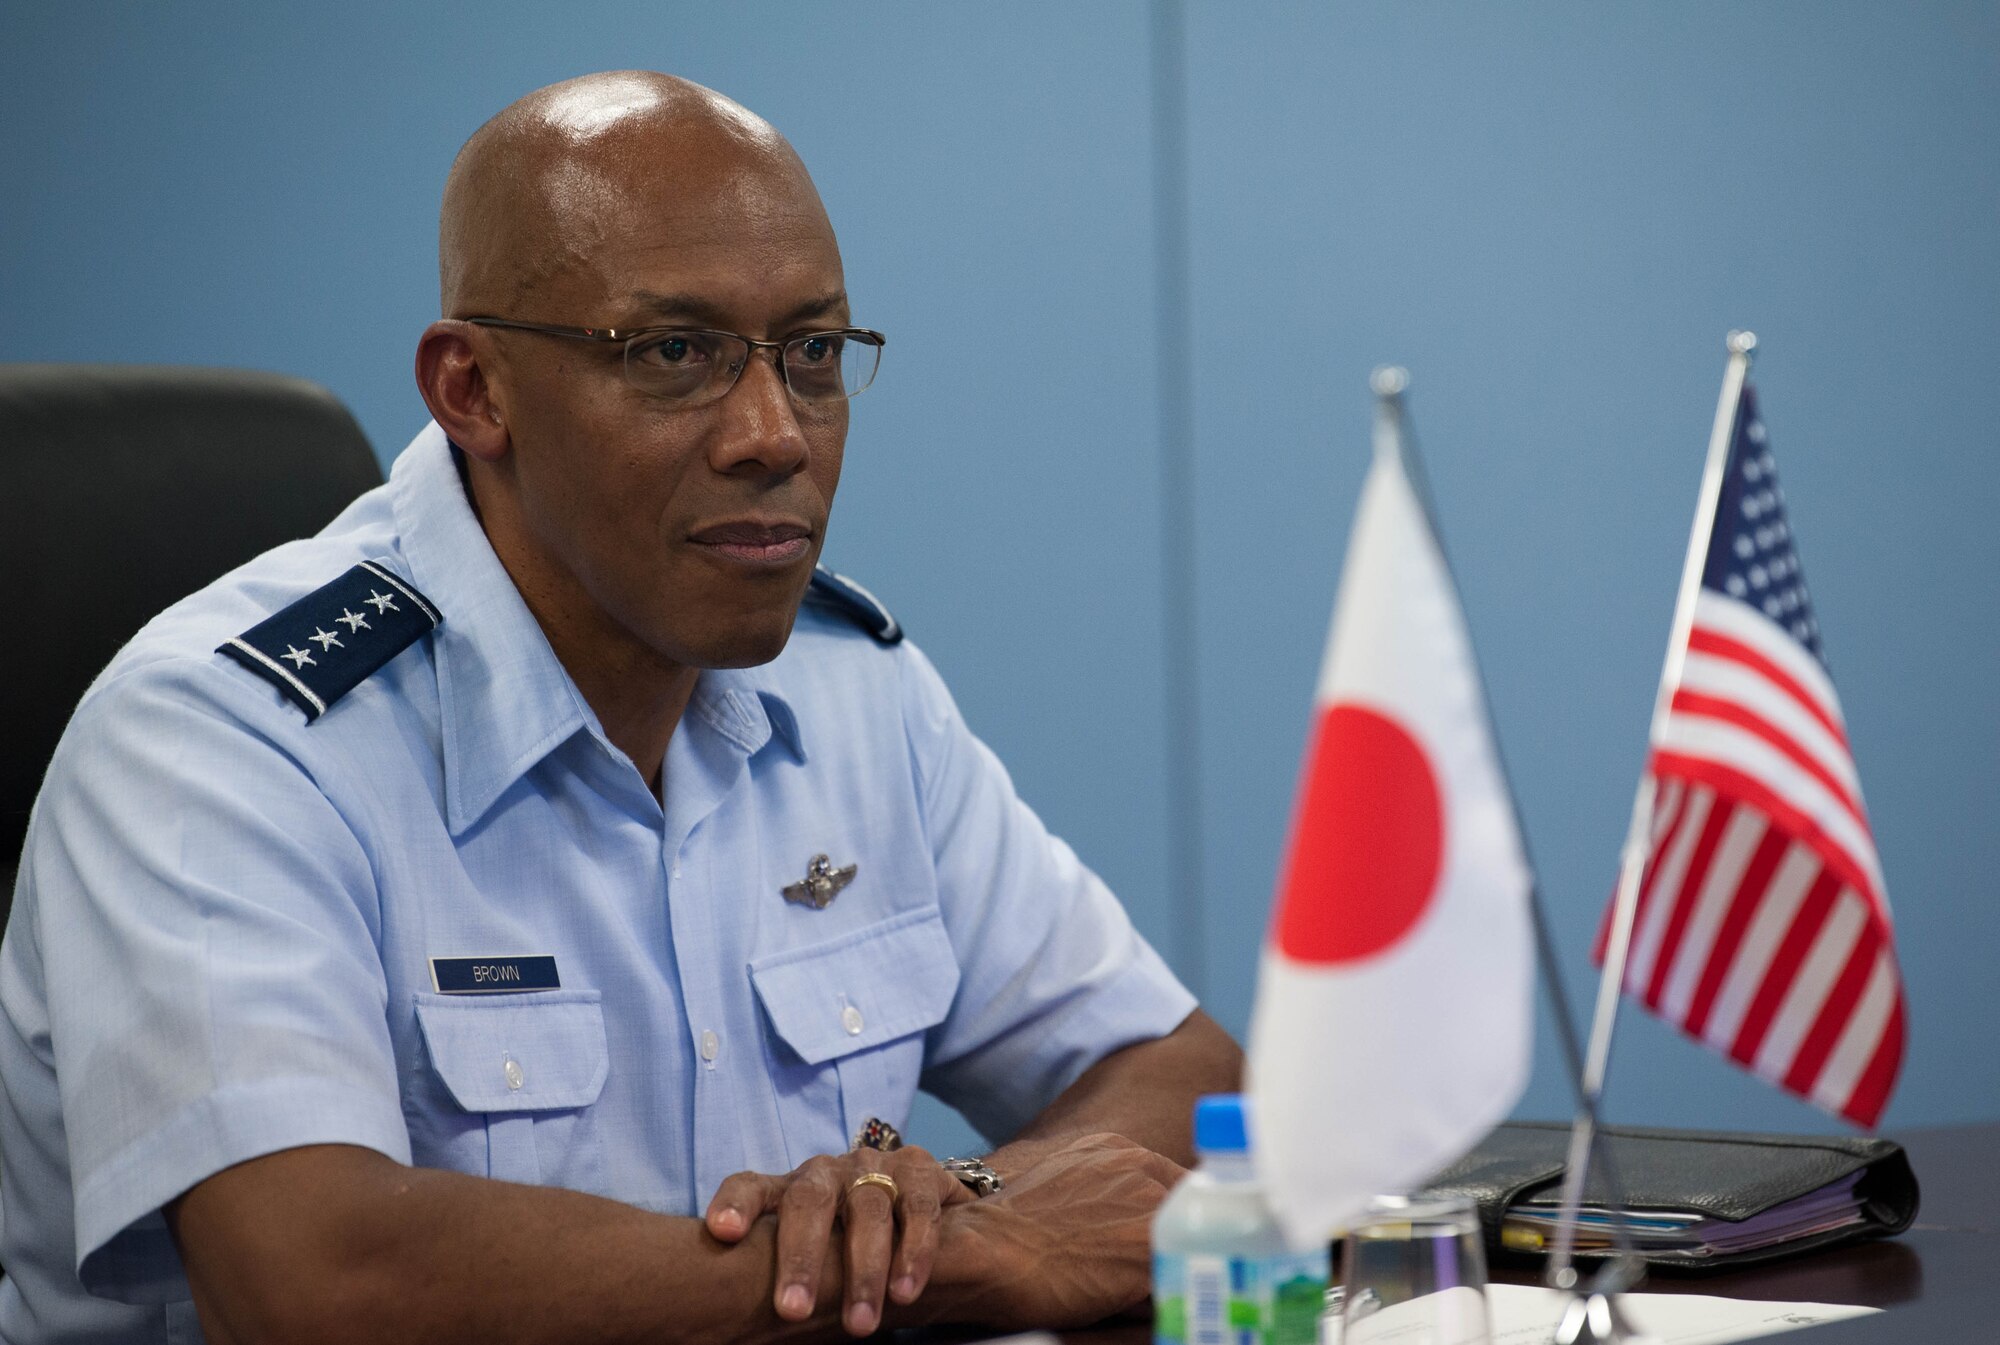 Gen. CQ Brown, Jr., Pacific Air Forces commander, attends an office call with Lt. Gen. Shigeki Muto, Air Defense Command (ADC) commander, during his visit to Yokota Air Base, Japan, Aug. 6, 2018. While at the ADC, Brown observed a ballistic missile defense demonstration and visited with the Airmen responsible for the vital mission set. (U.S. Air Force photo by Staff Sgt. Hailey Haux)